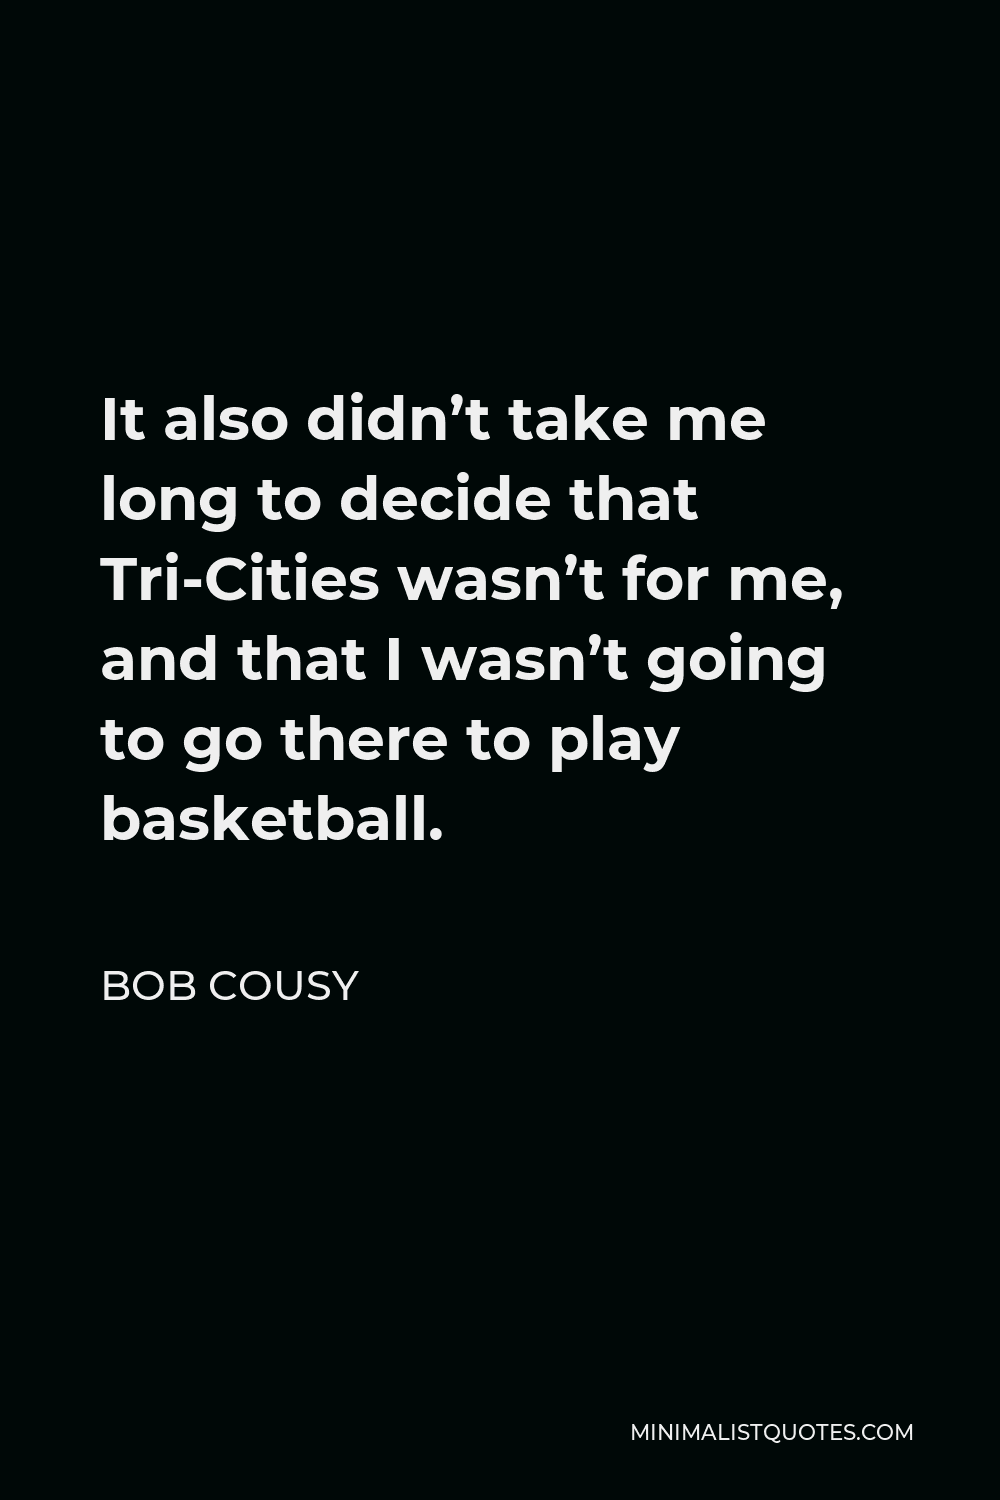 Bob Cousy Quote - It also didn’t take me long to decide that Tri-Cities wasn’t for me, and that I wasn’t going to go there to play basketball.